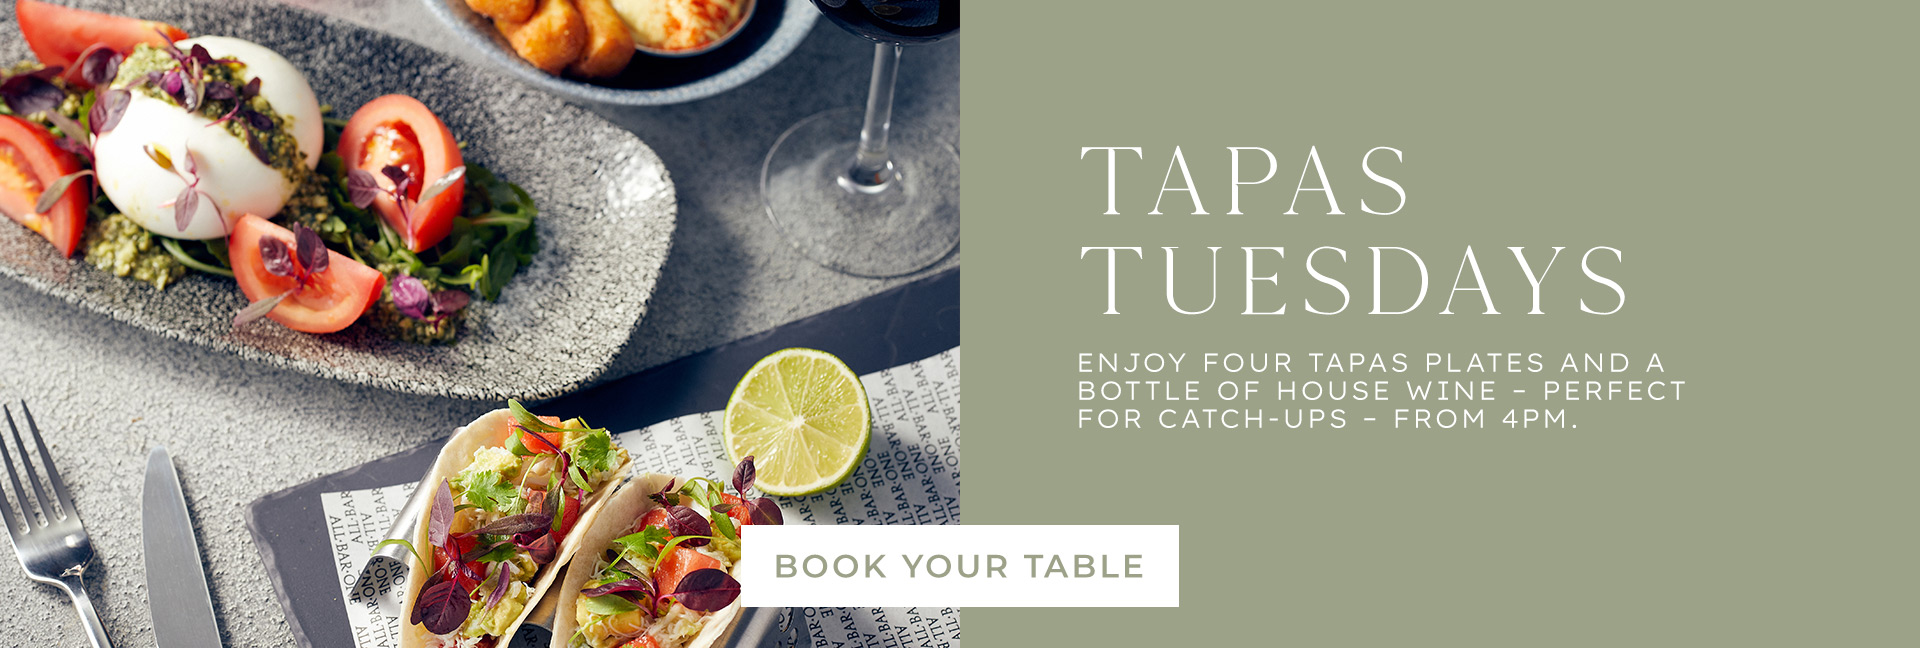 Tapas Tuesday at All Bar One Butlers Wharf - Book now